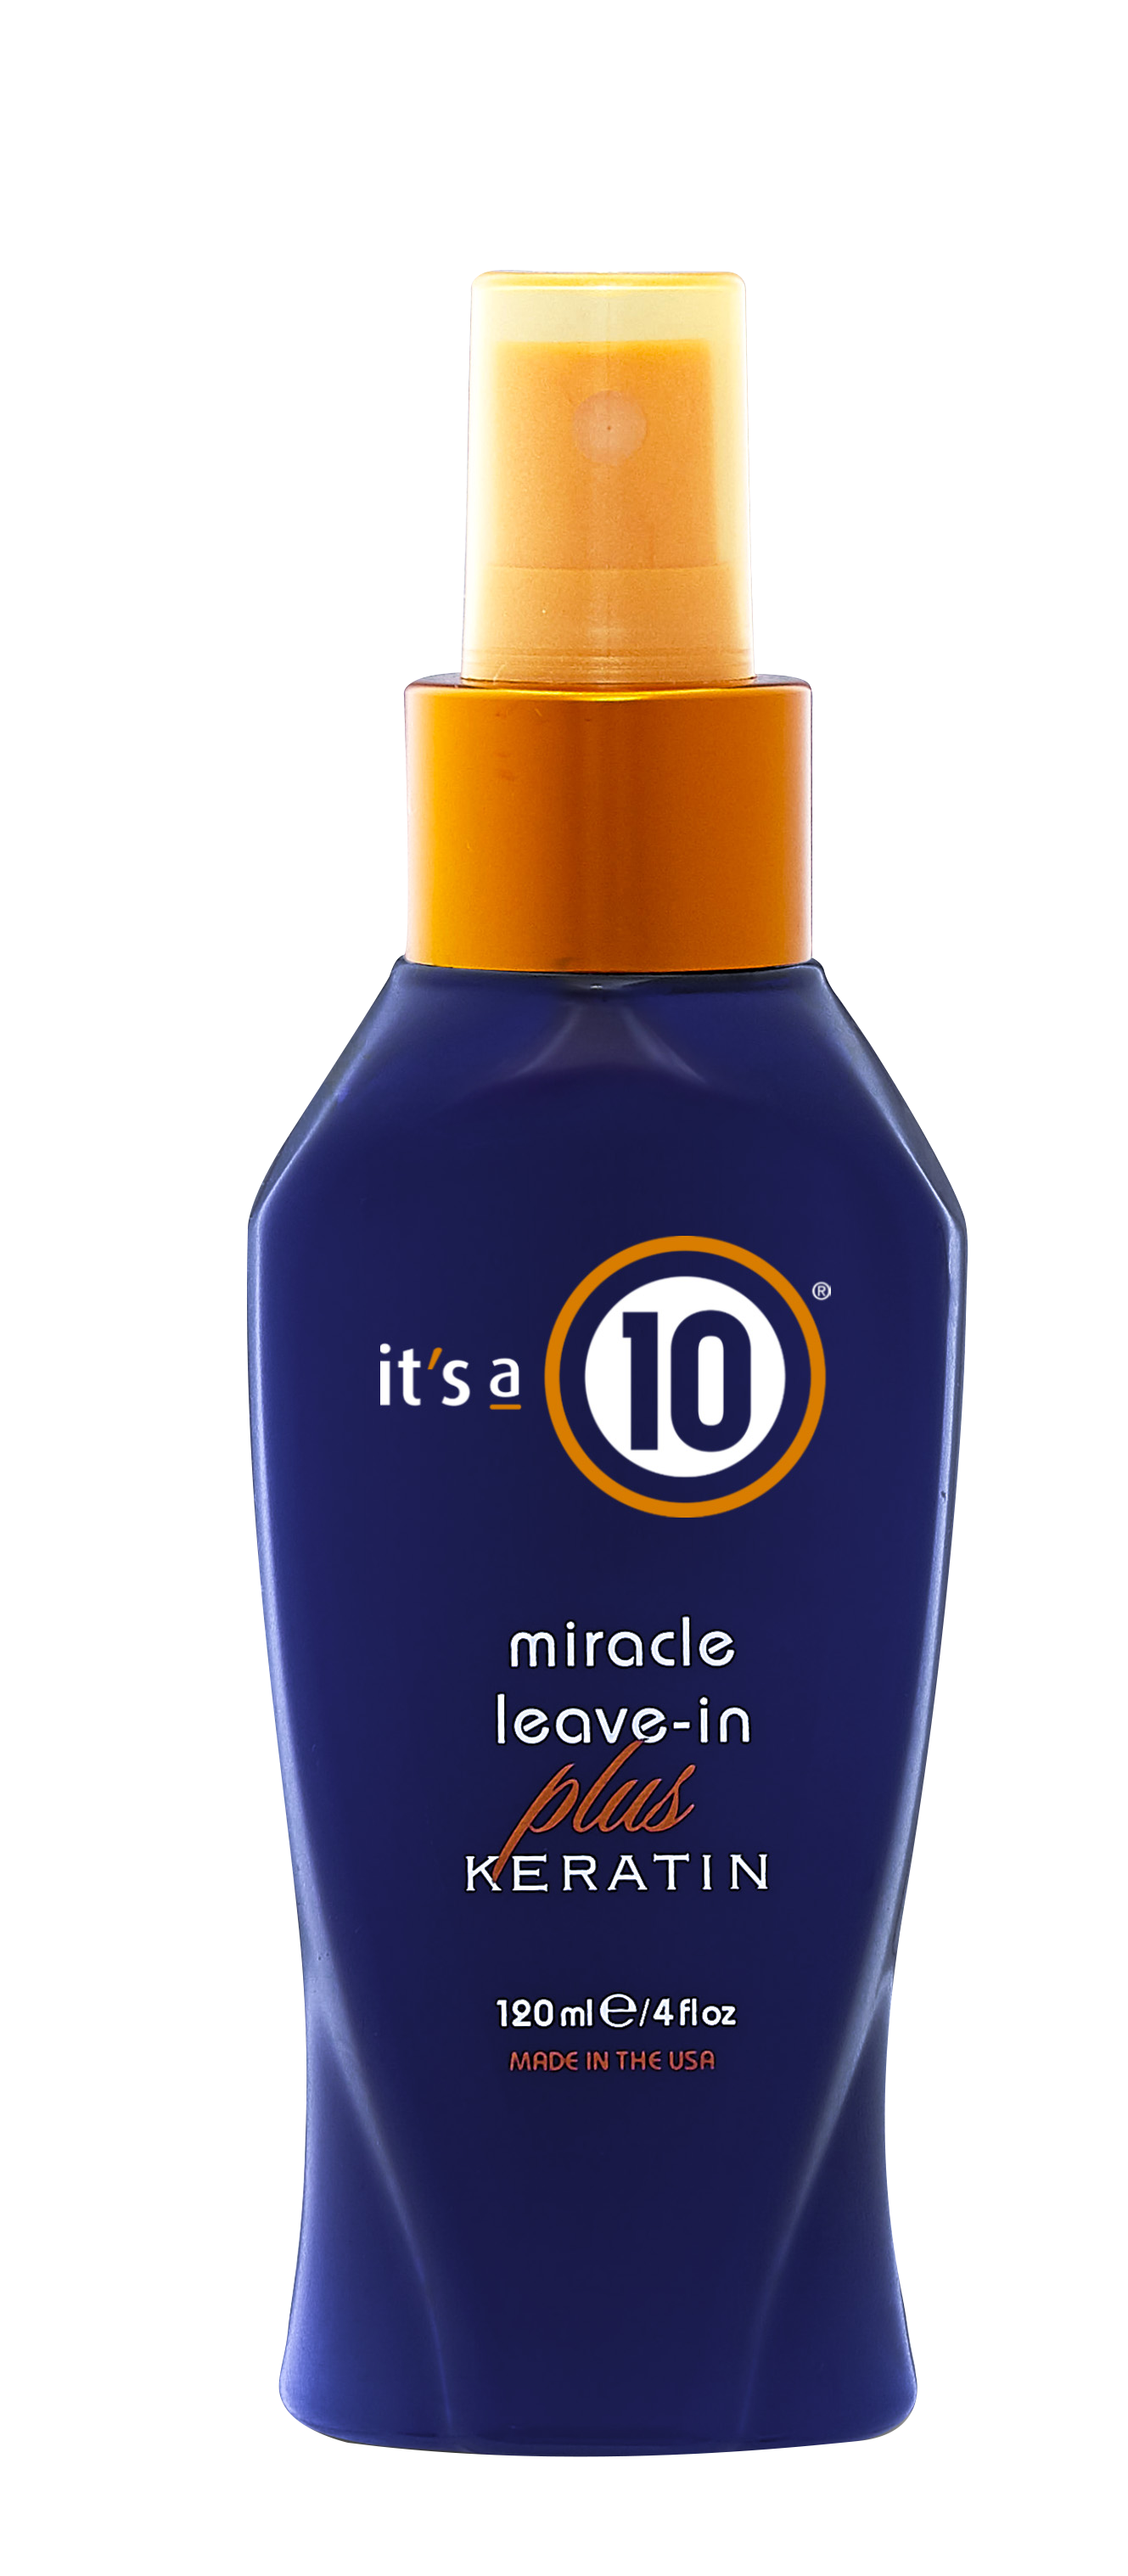 It's a 10 Miracle Leave-In Conditioner plus Keratin